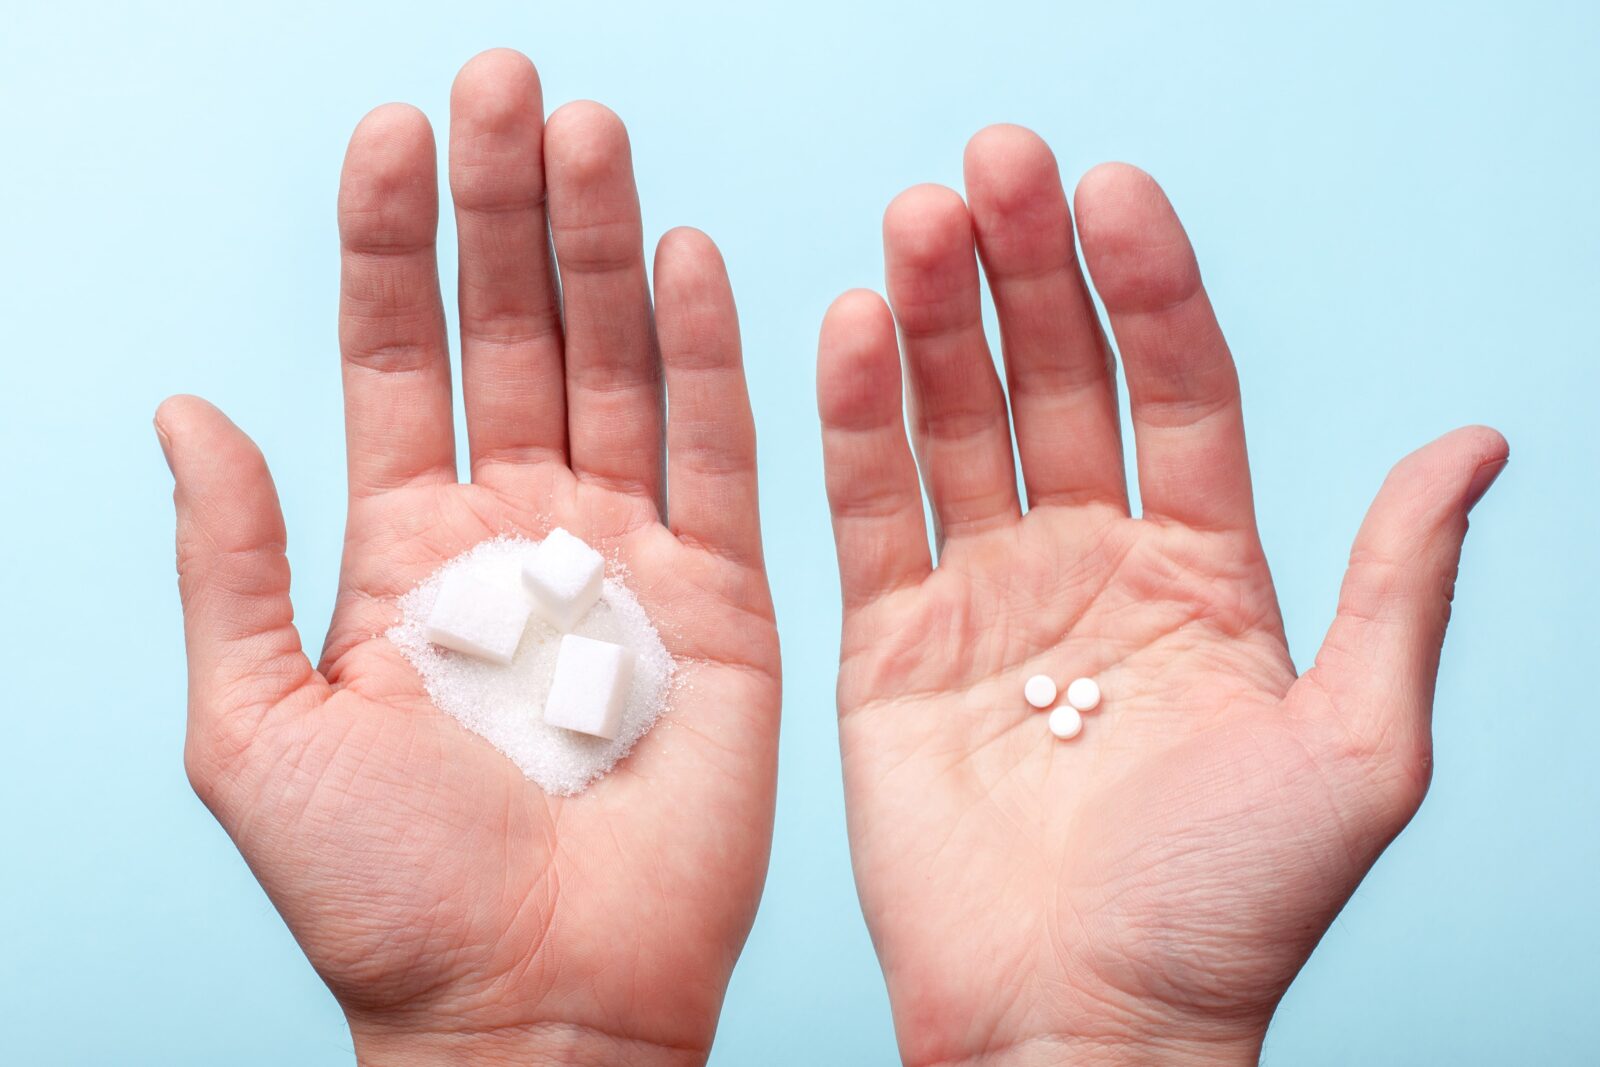 one hand with sugar cubes and the other hand with artificial sweeteners